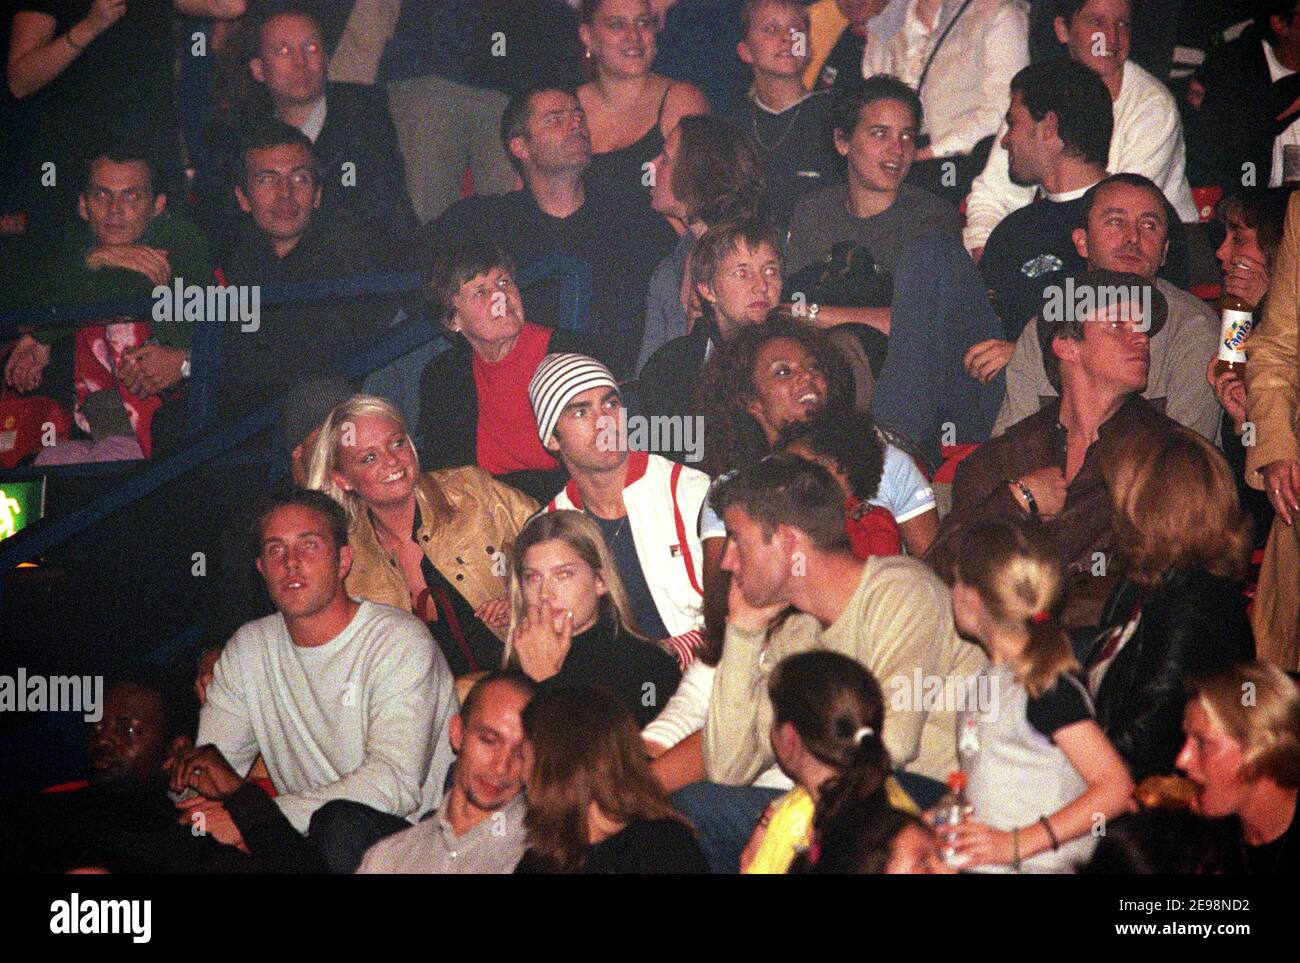 Emma Bunton with her boyfriend sitting next to Melanie Brown aka Mel B with her daughter Phoenix Chi as they watch their former Spice Girl band mate Mel C in concert at Wembley Arena in London, UK. 5th November 2000 Stock Photo